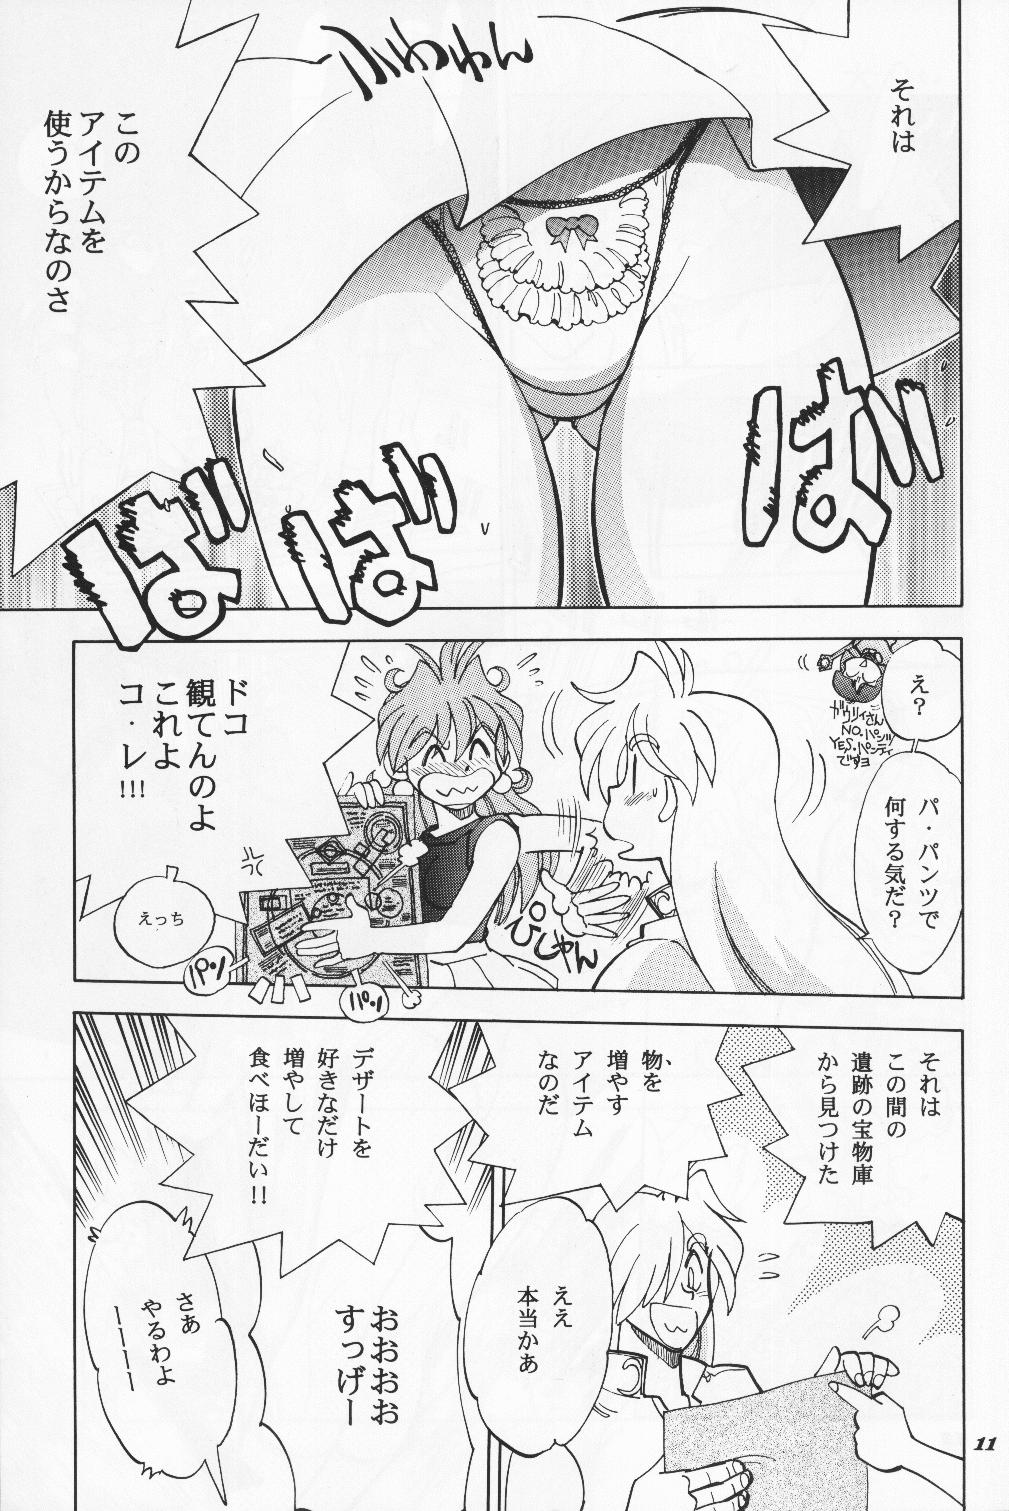 Tanned Mantou 19 - Slayers Casal - Page 11